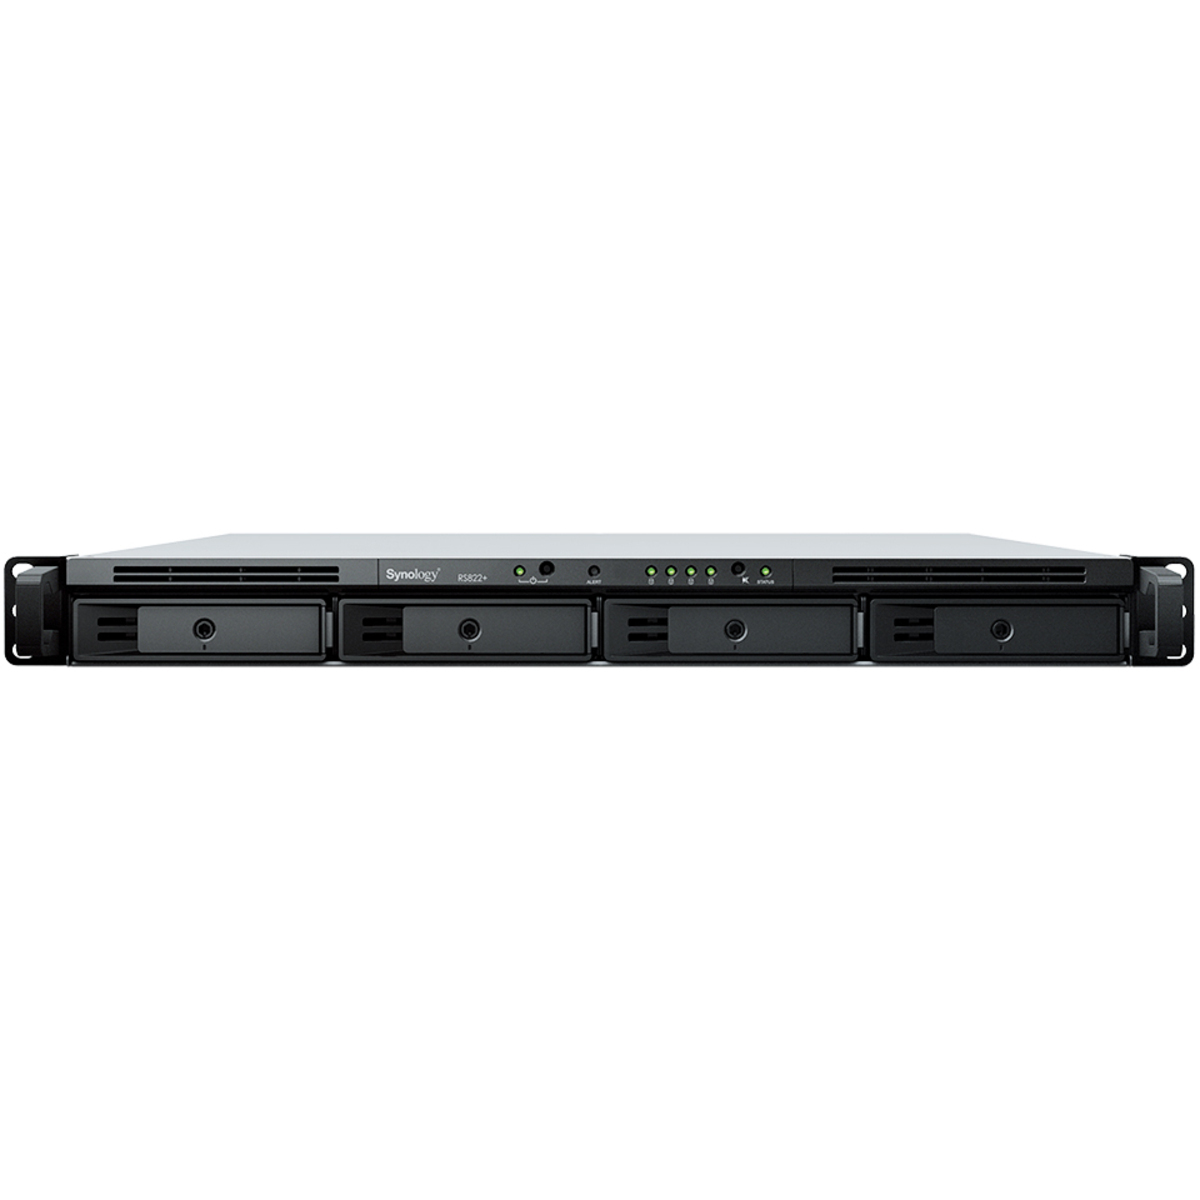 Synology RackStation RS822RP+ 30tb 4-Bay RackMount Multimedia / Power User / Business NAS - Network Attached Storage Device 3x10tb Seagate IronWolf Pro ST10000NT001 3.5 7200rpm SATA 6Gb/s HDD NAS Class Drives Installed - Burn-In Tested - ON SALE - FREE RAM UPGRADE RackStation RS822RP+